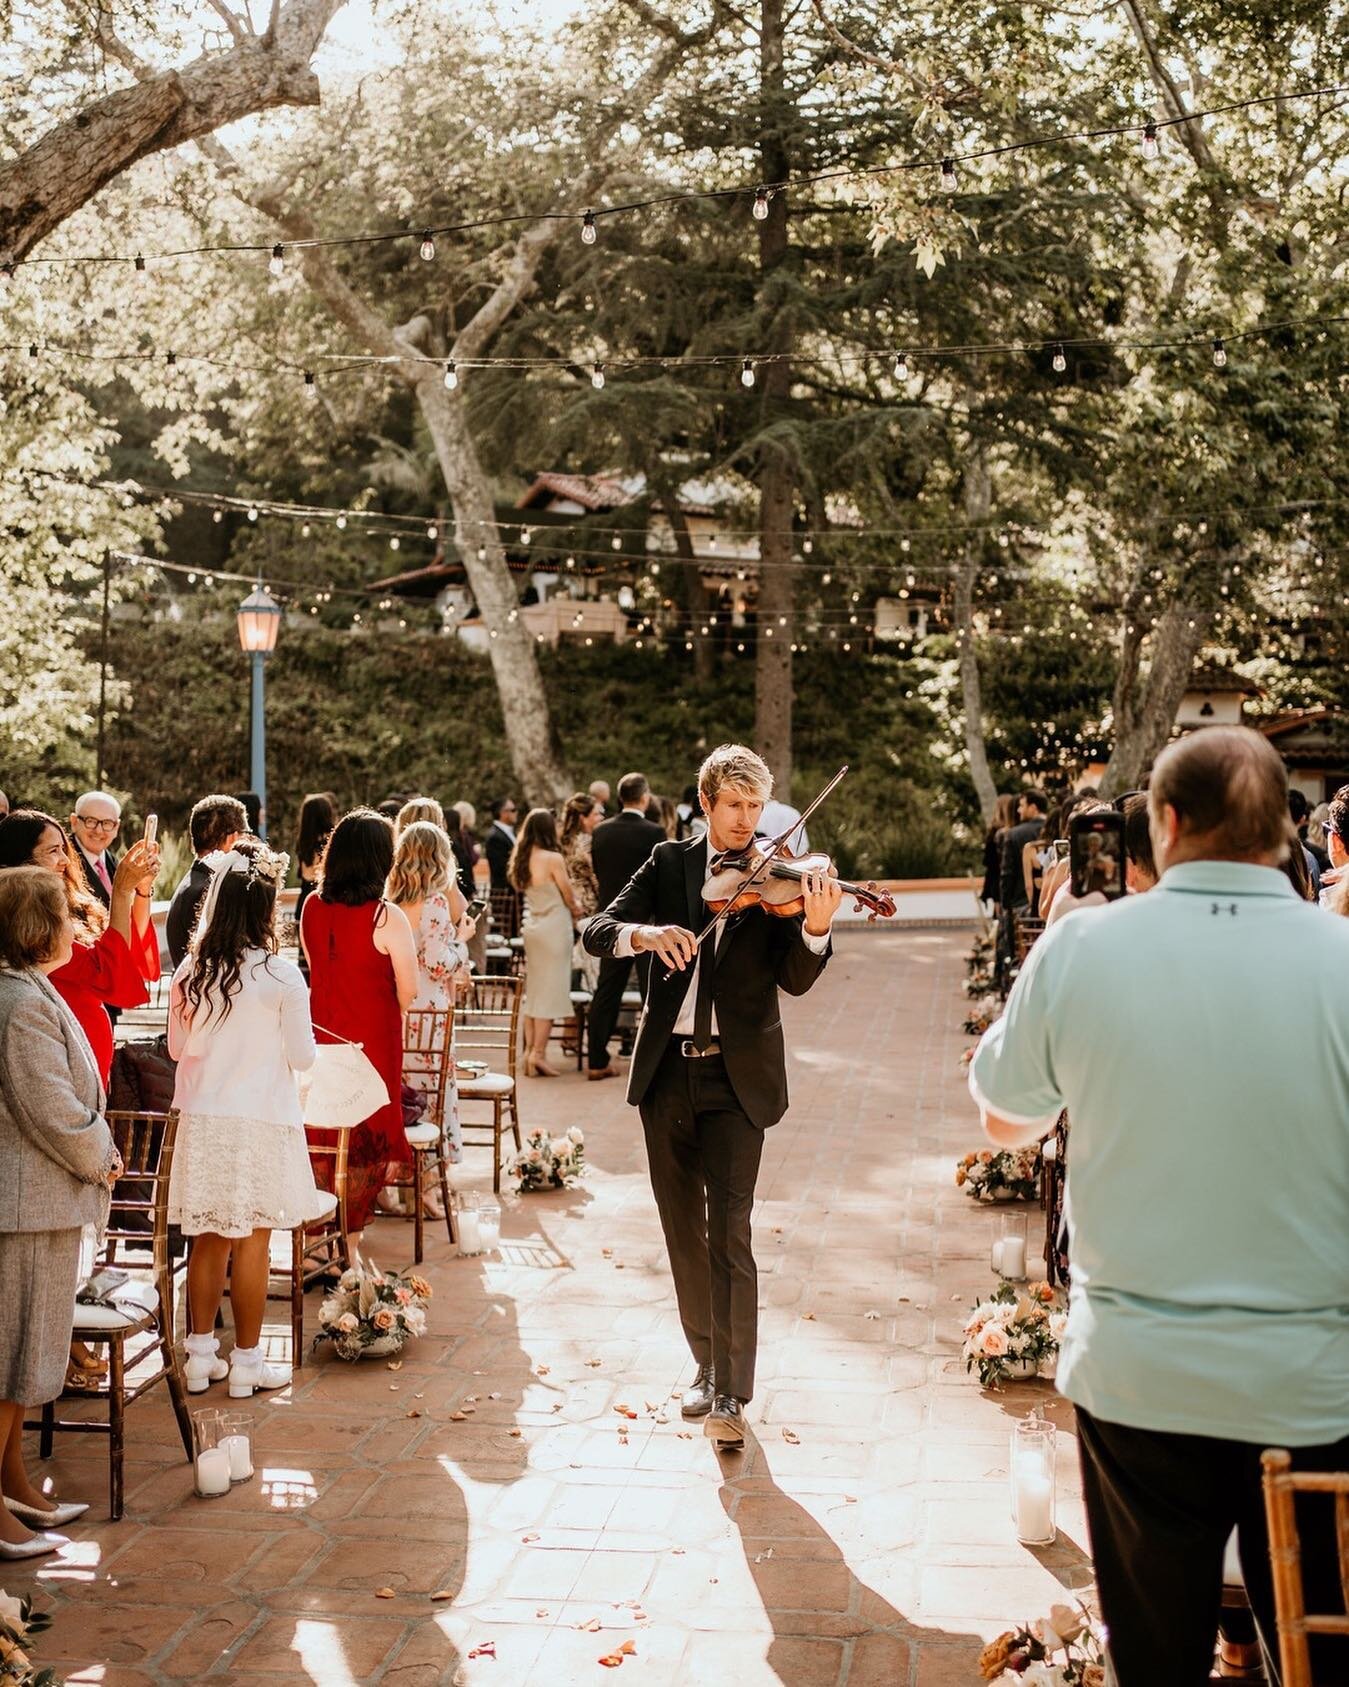 A violinist serenading you down the aisle? YES PLEASE😍 there may be nothing more romantic.

.....
Venue @rancholaslomas 
Planning, Design + Flowers @ruffleeffect 
Violinist @danielmorrismusic 
Catering @24carrotscatering 
DJ @thisisgoodmood 

#weddi